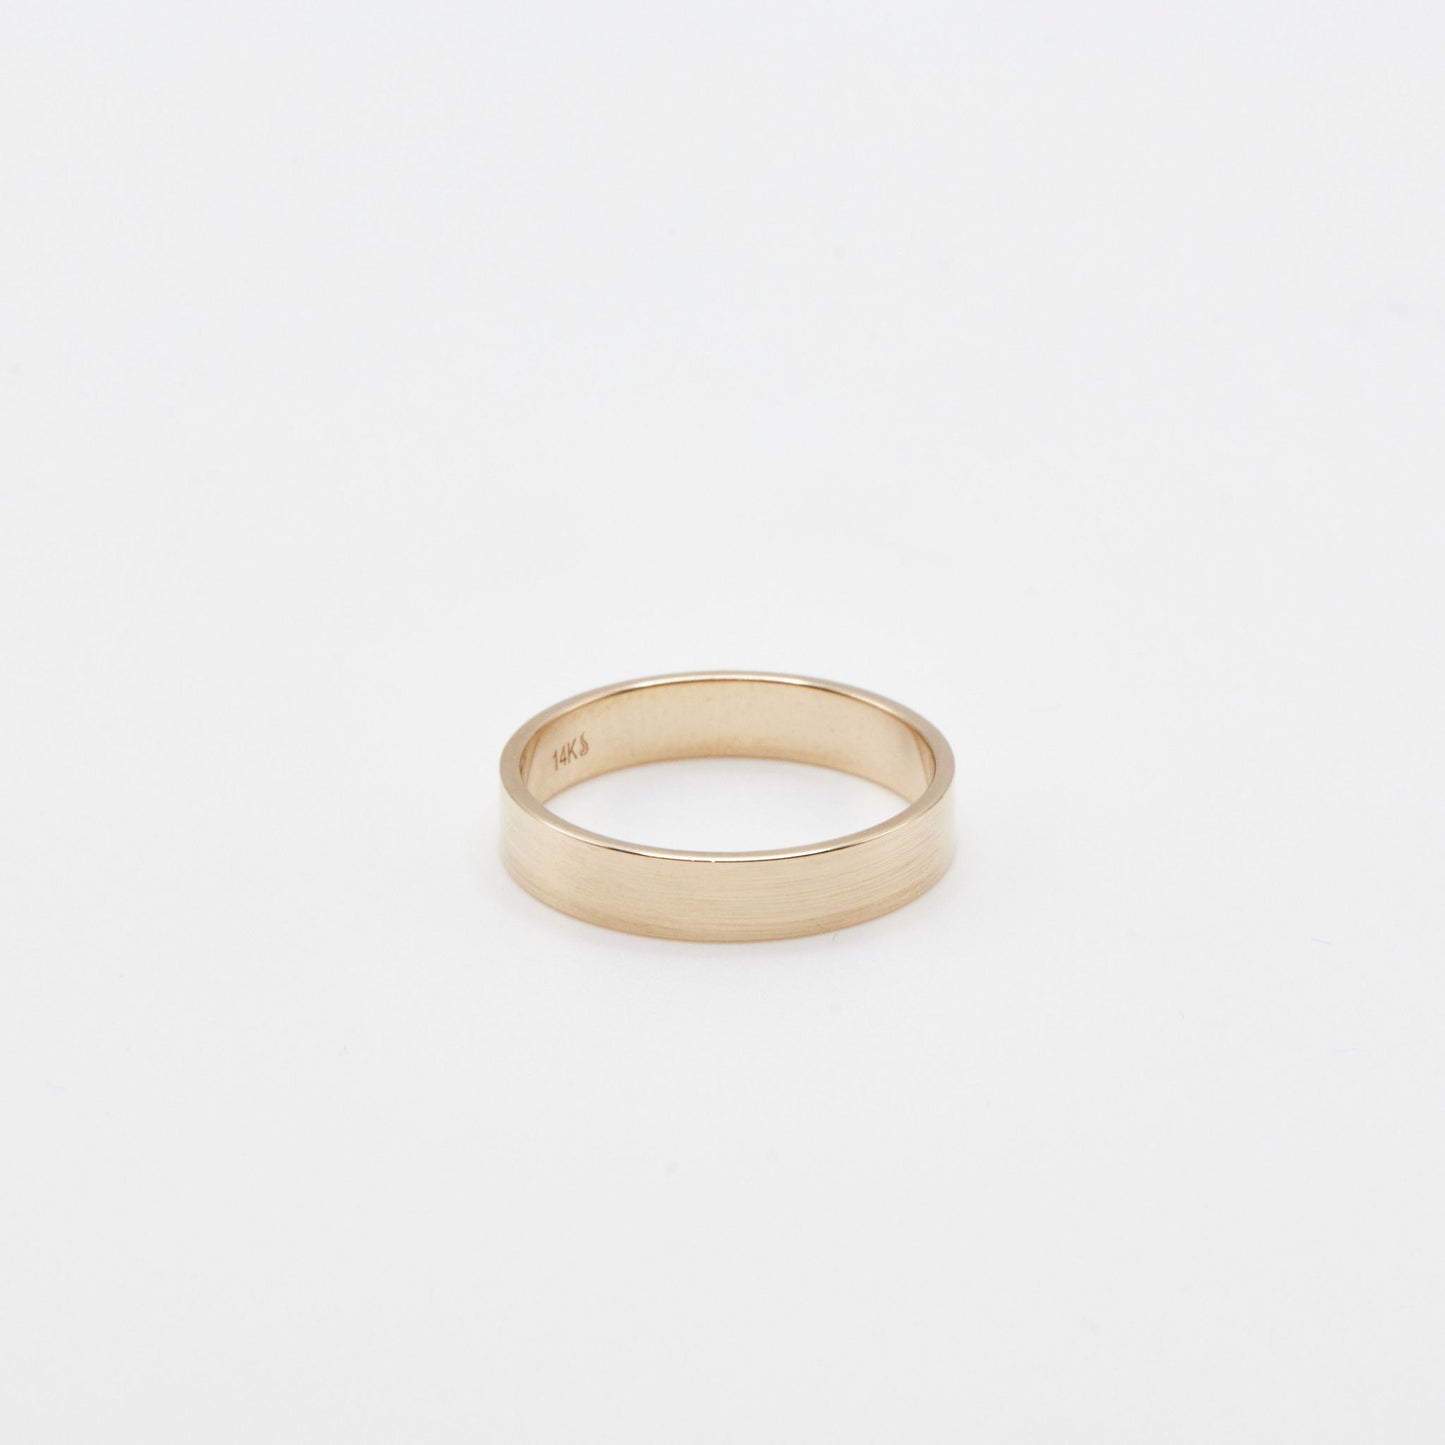 4 mm yellow gold flat wedding band on a white background